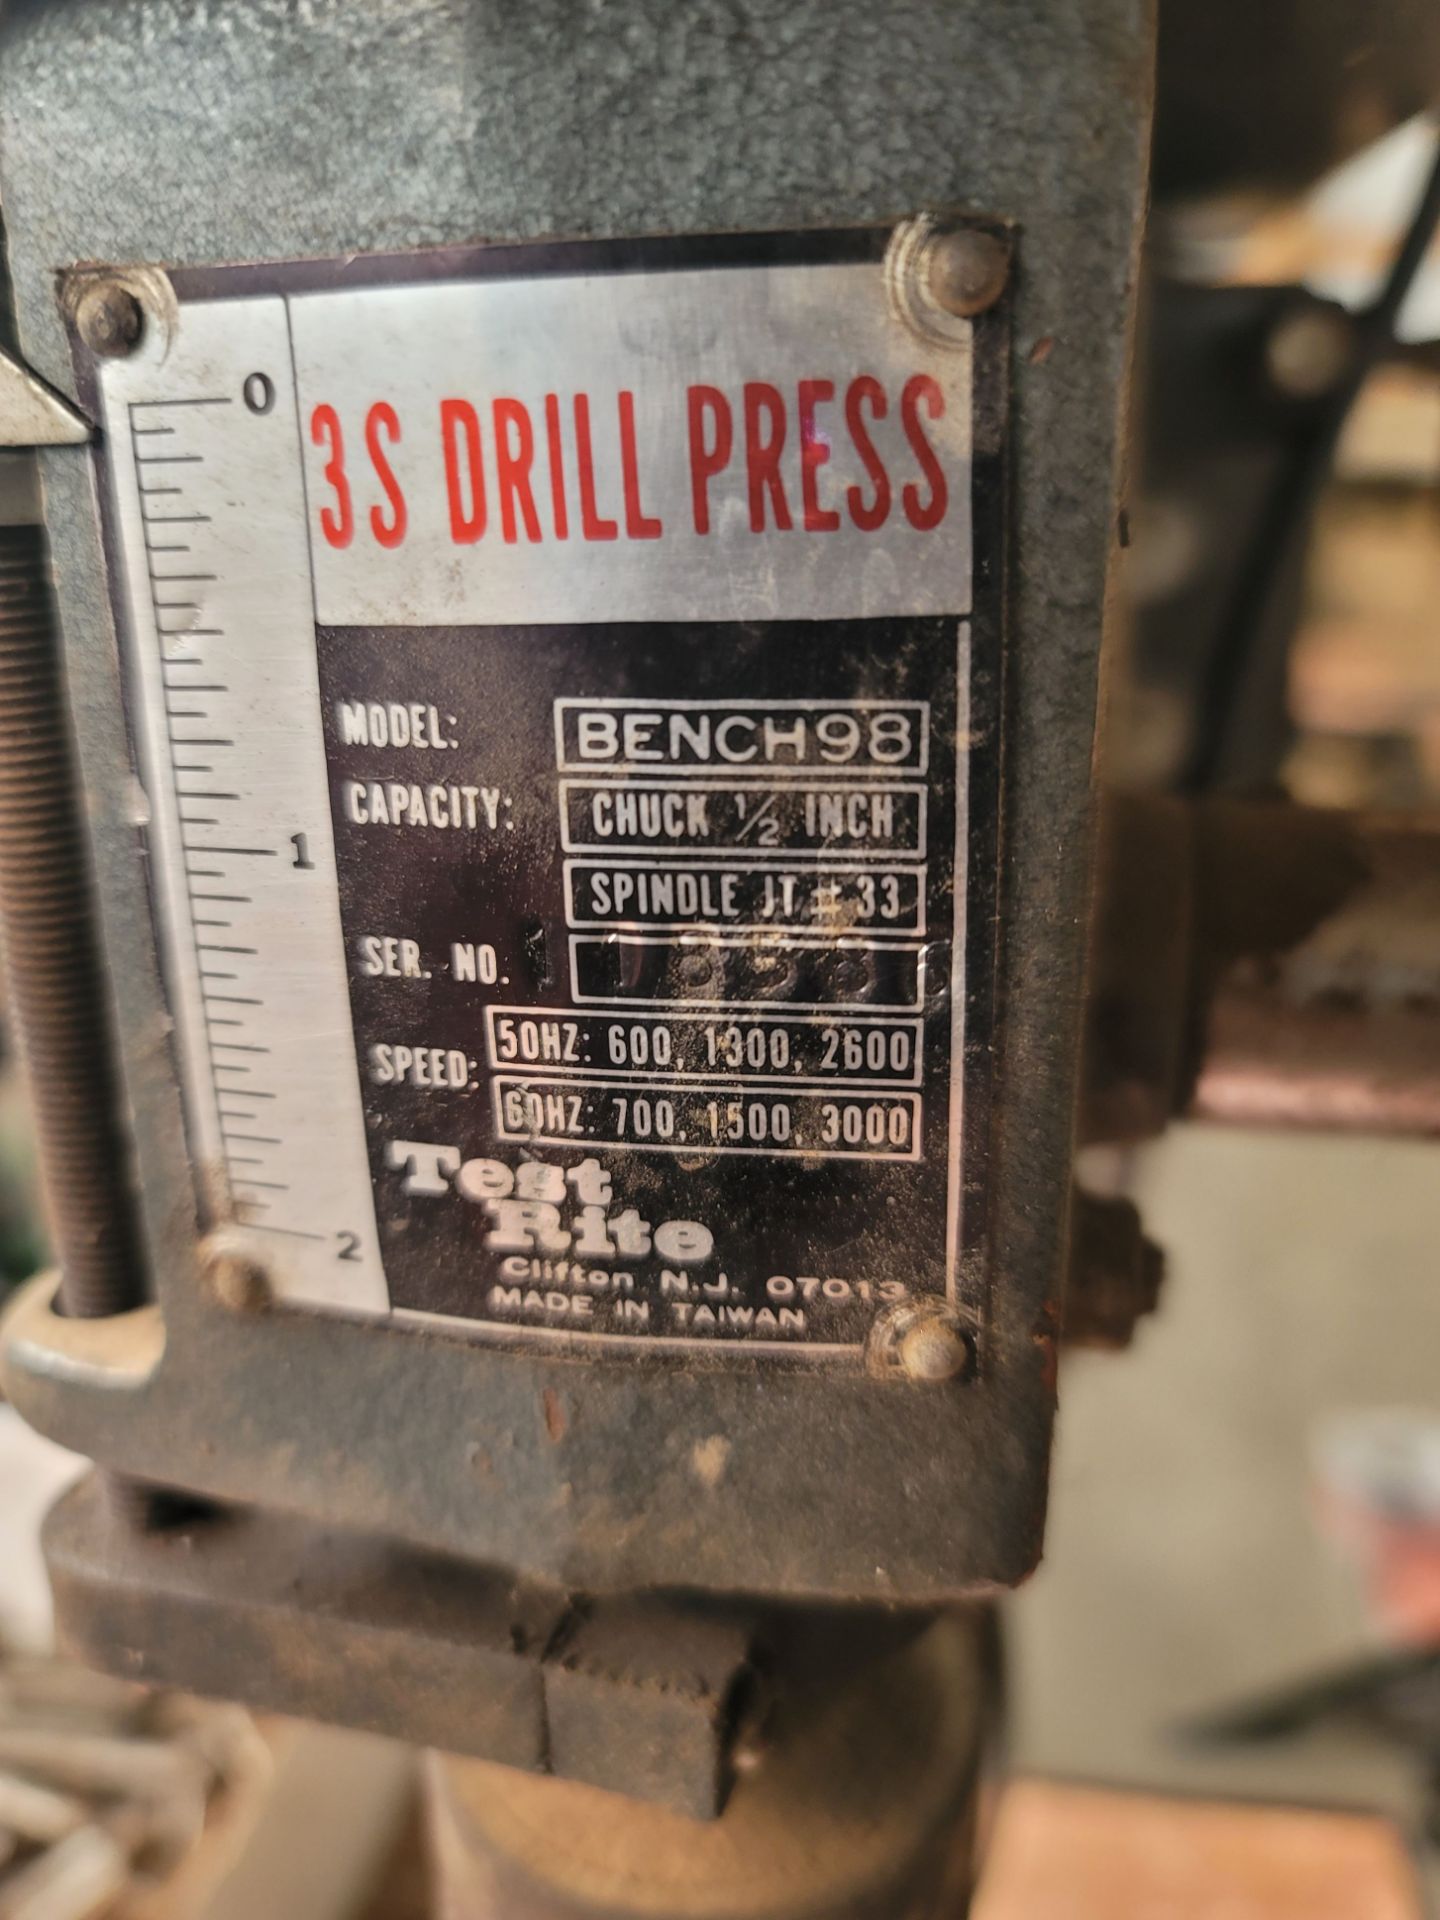 BENCHTOP DRILL PRESS, MODEL BENCH98 - Image 2 of 2